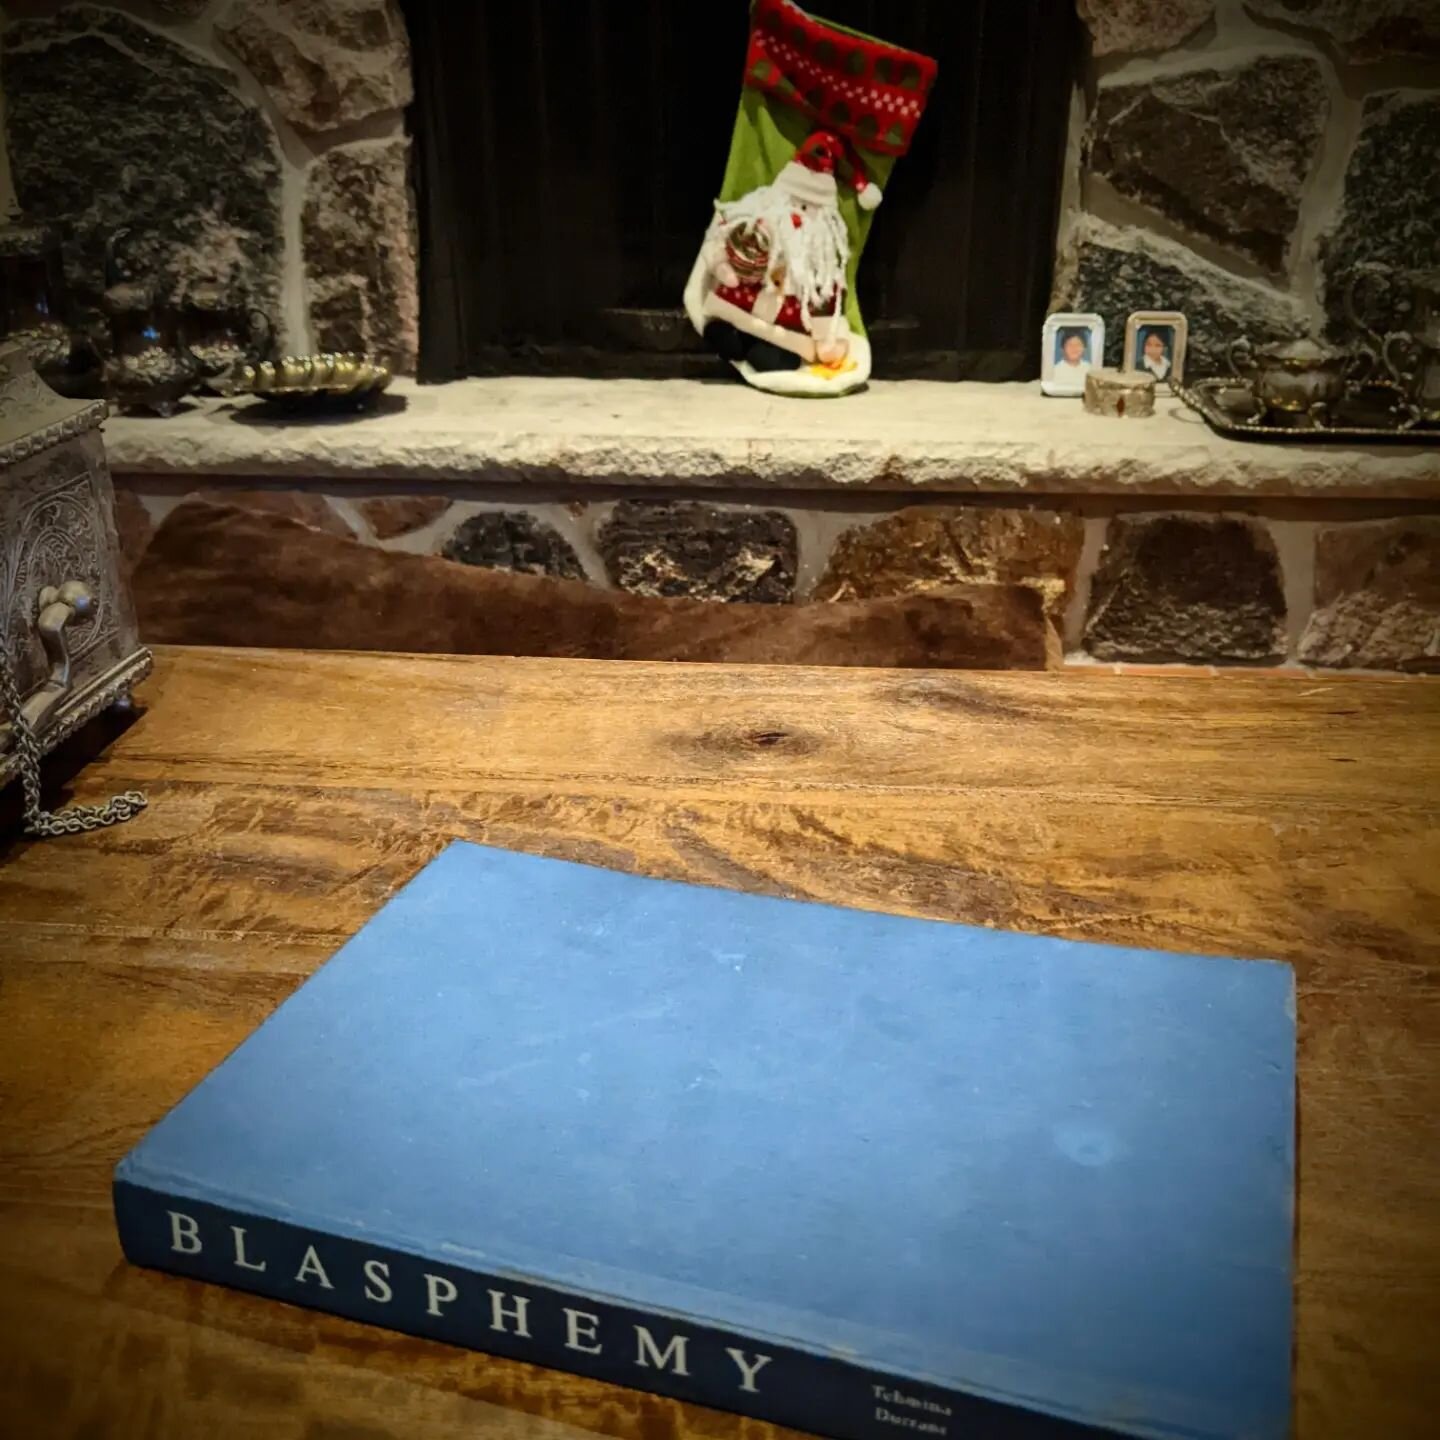 Reading is such an interesting experience, in how we end up linking what exists on the pages to other thoughts, other places, other time periods.

Blasphemy by Tehmina Durrani is a novel inspired by true events. It is a horrifying story about patriar